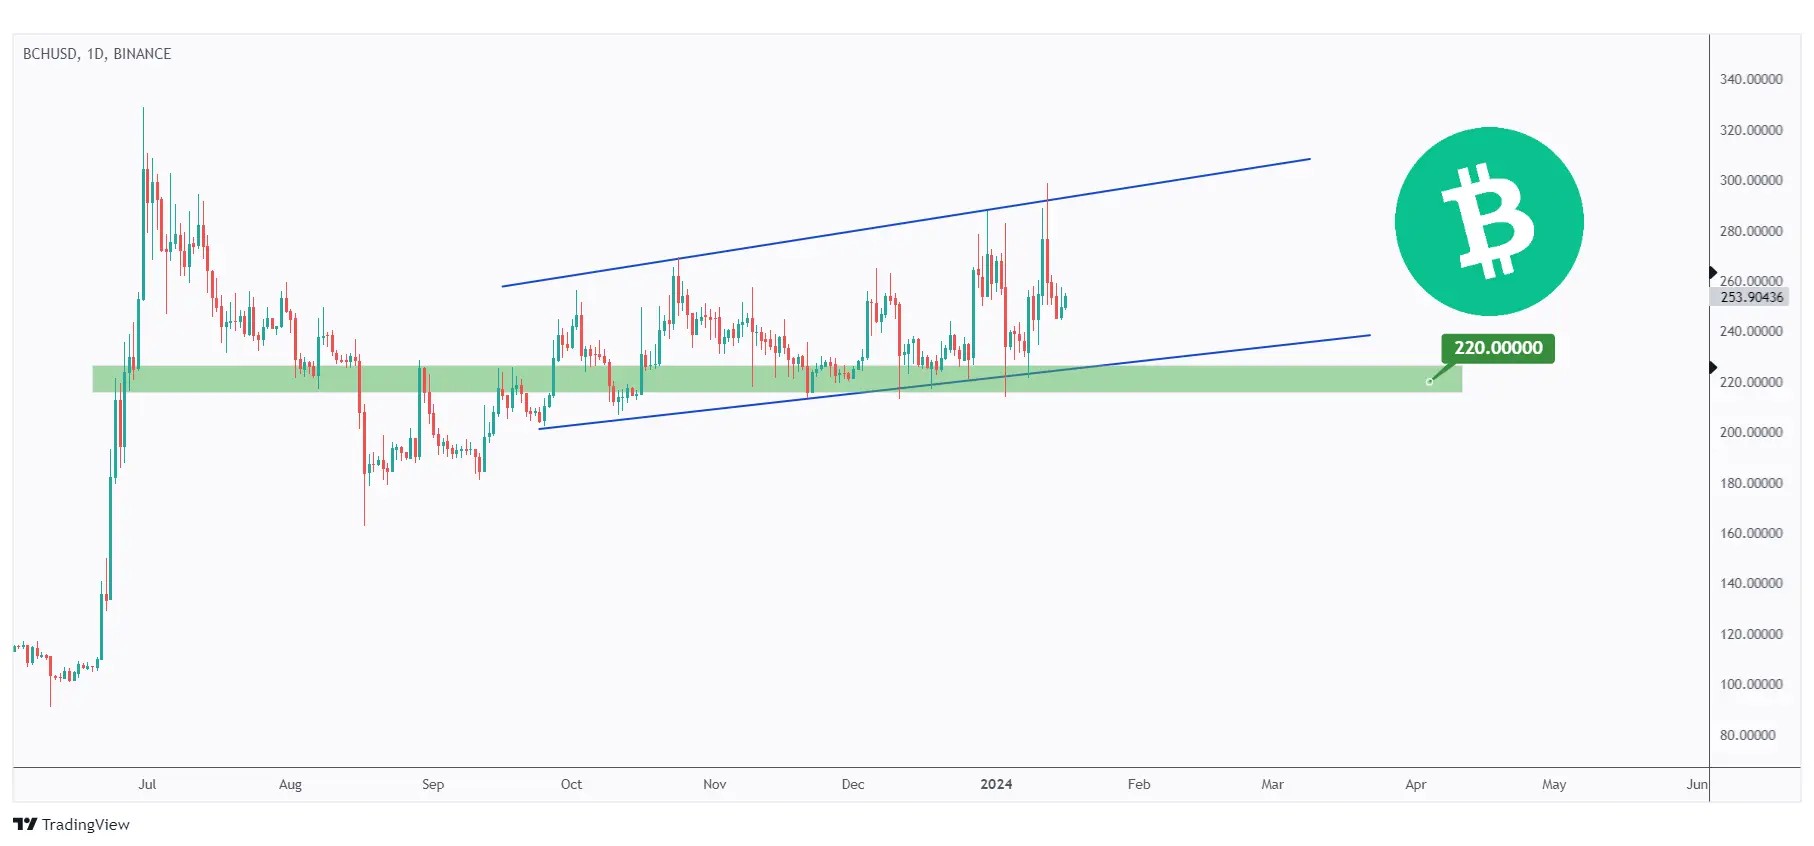 bitcoin cash daily chart showing the overall bullish trend inside the rising channel.